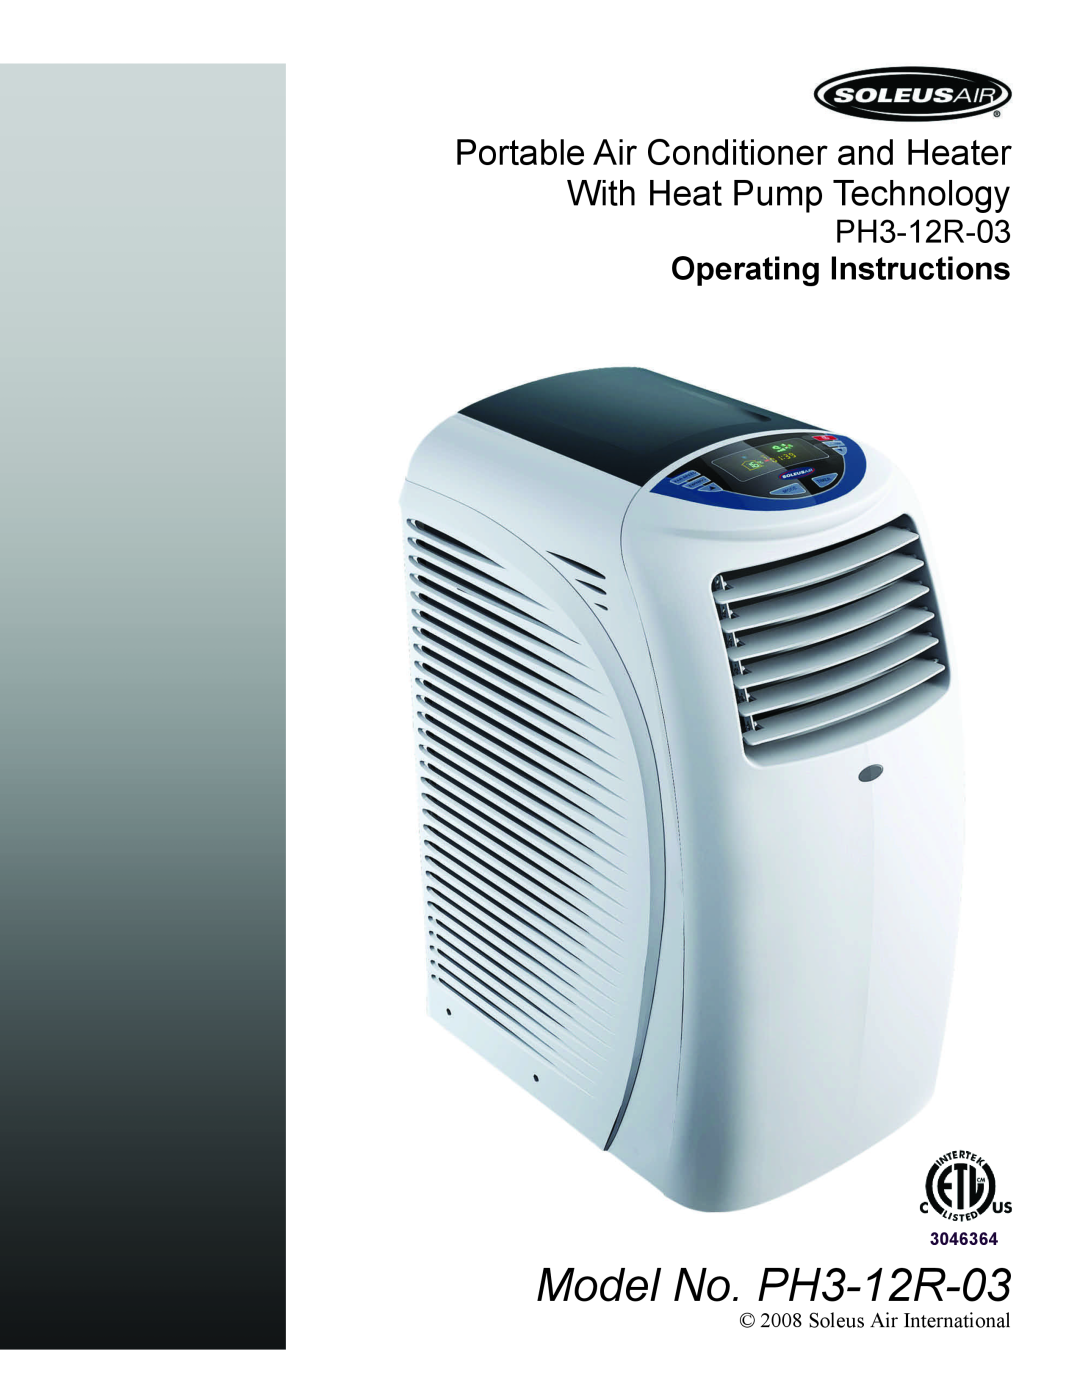 Soleus Air operating instructions Model No. PH3-12R-03, Reference No. KY2-34HP, Portable Air Conditioner and Heater 